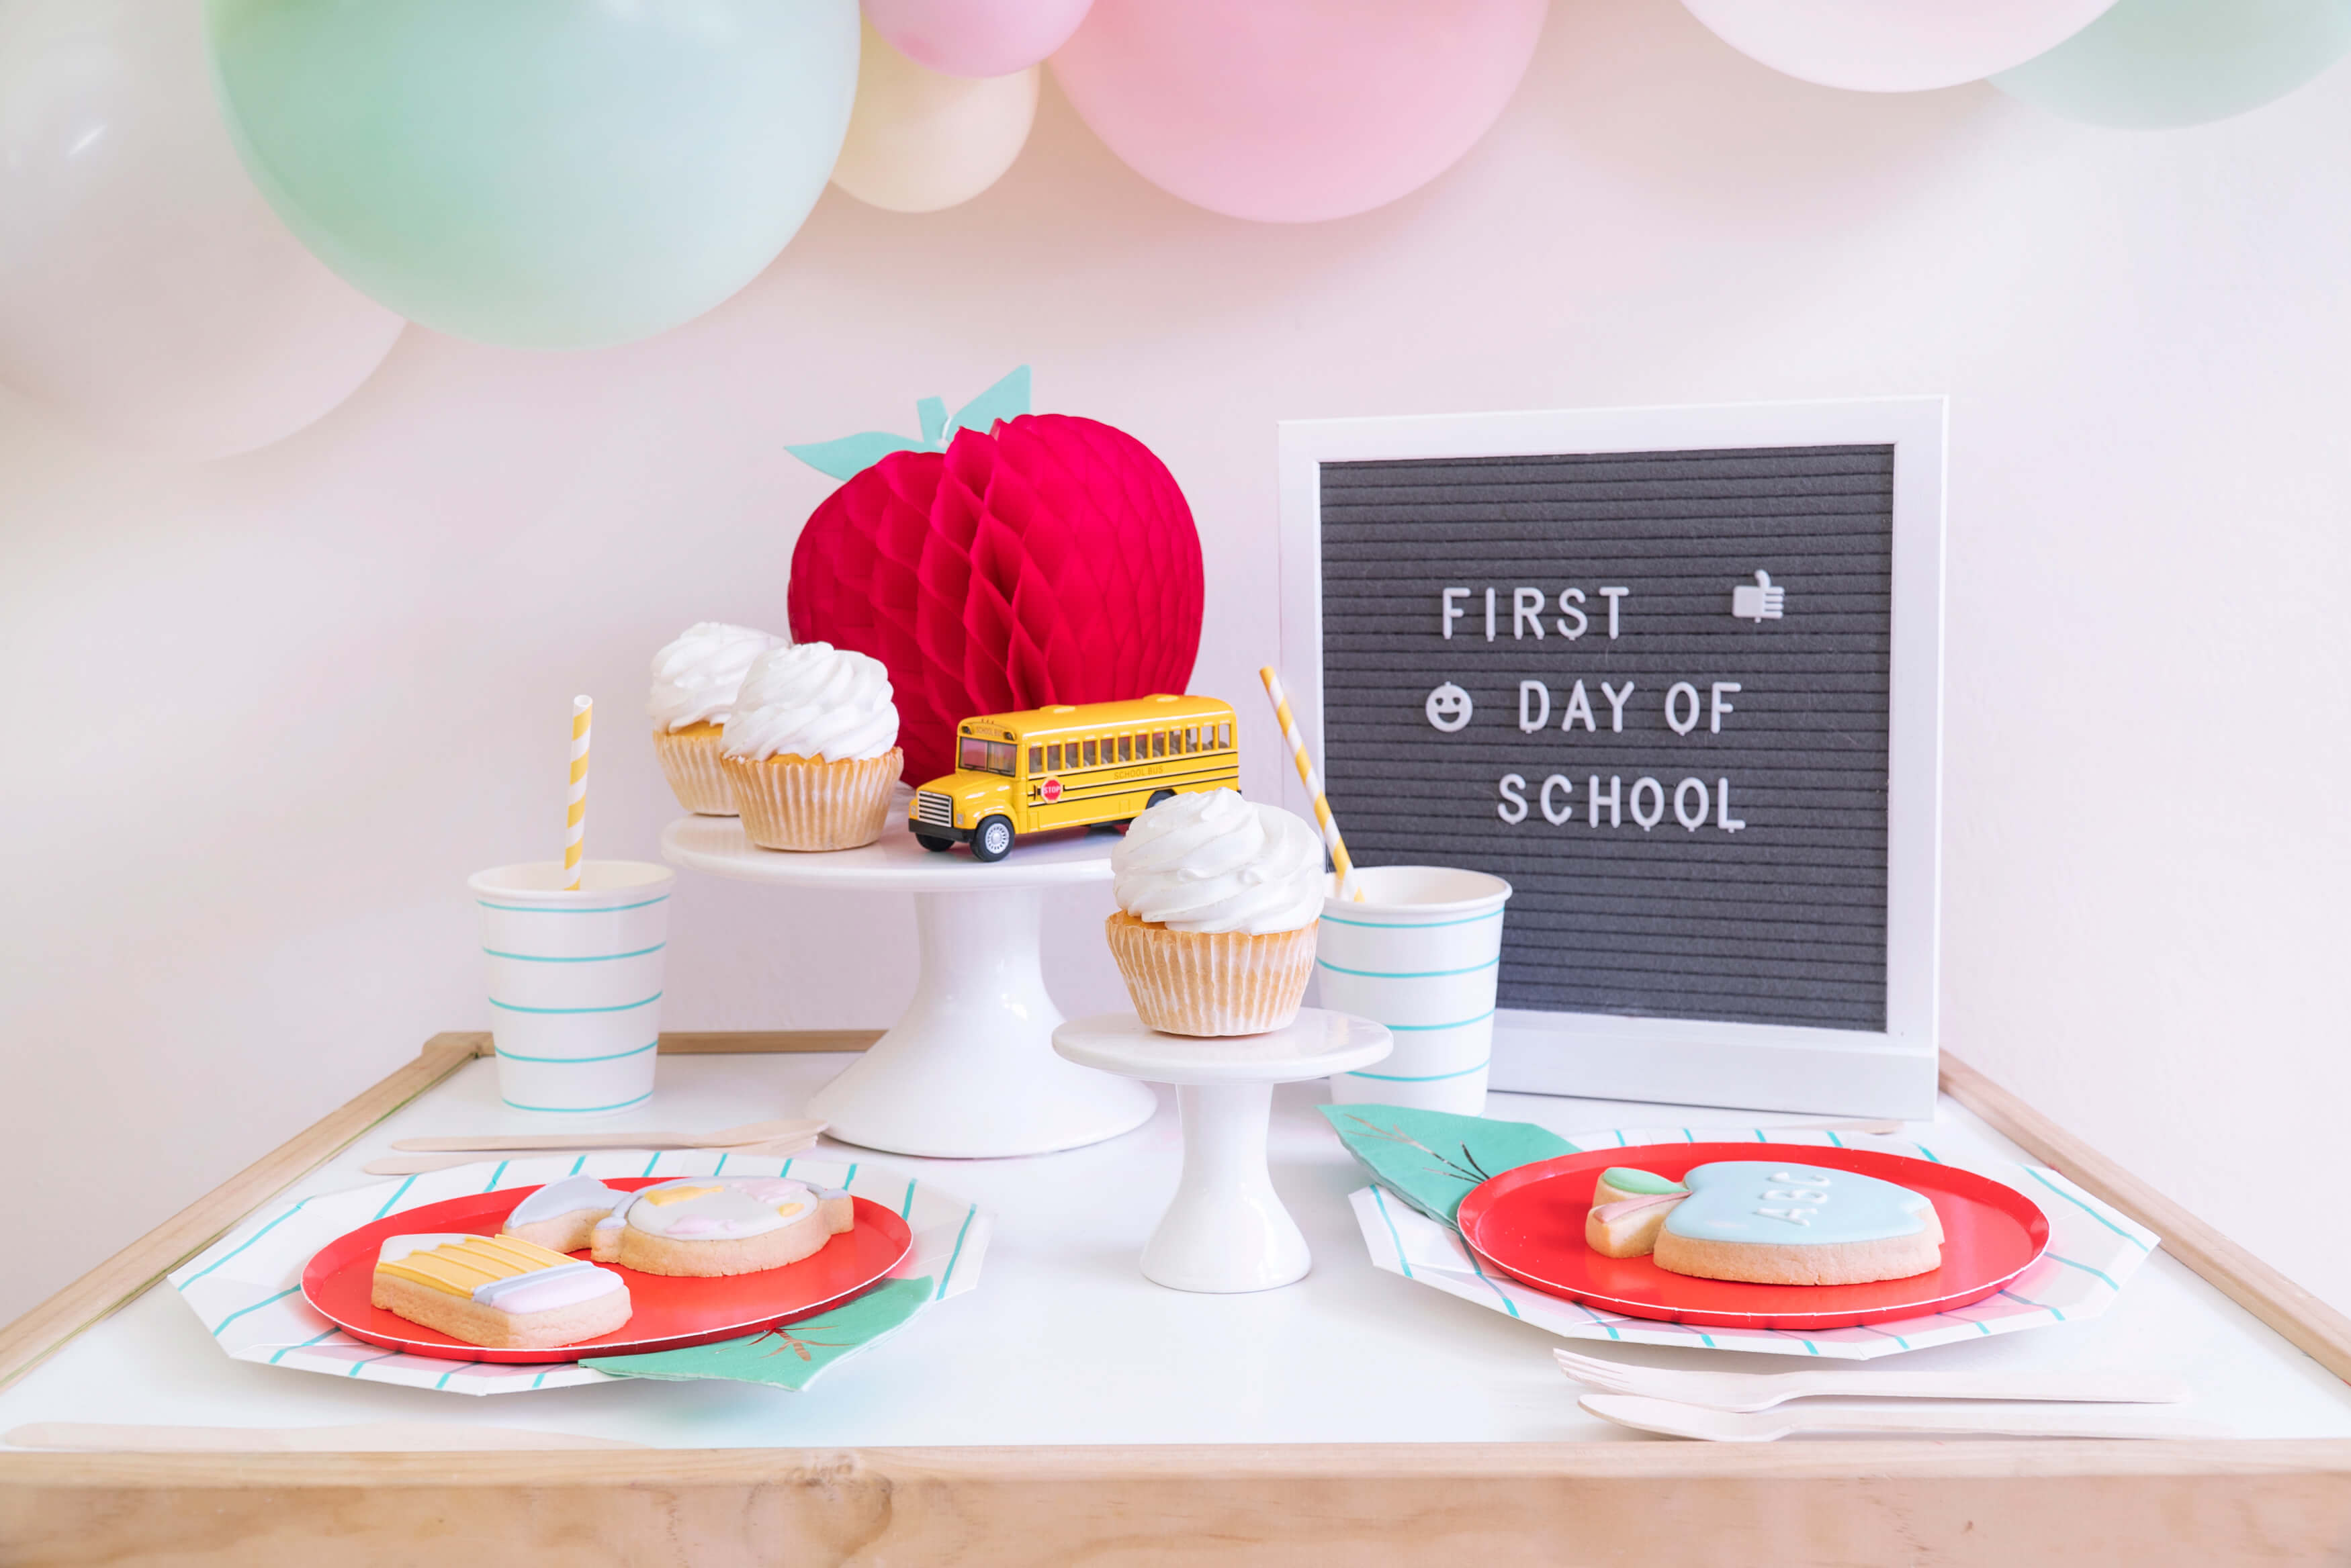 Momo party_Back to school party table set up idea with letter board, balloon garland, Apple honeycomb decoration, School bus toy, Cupcakes, Stripe paper plates, cups, Oh happy day cherry plate and cookies